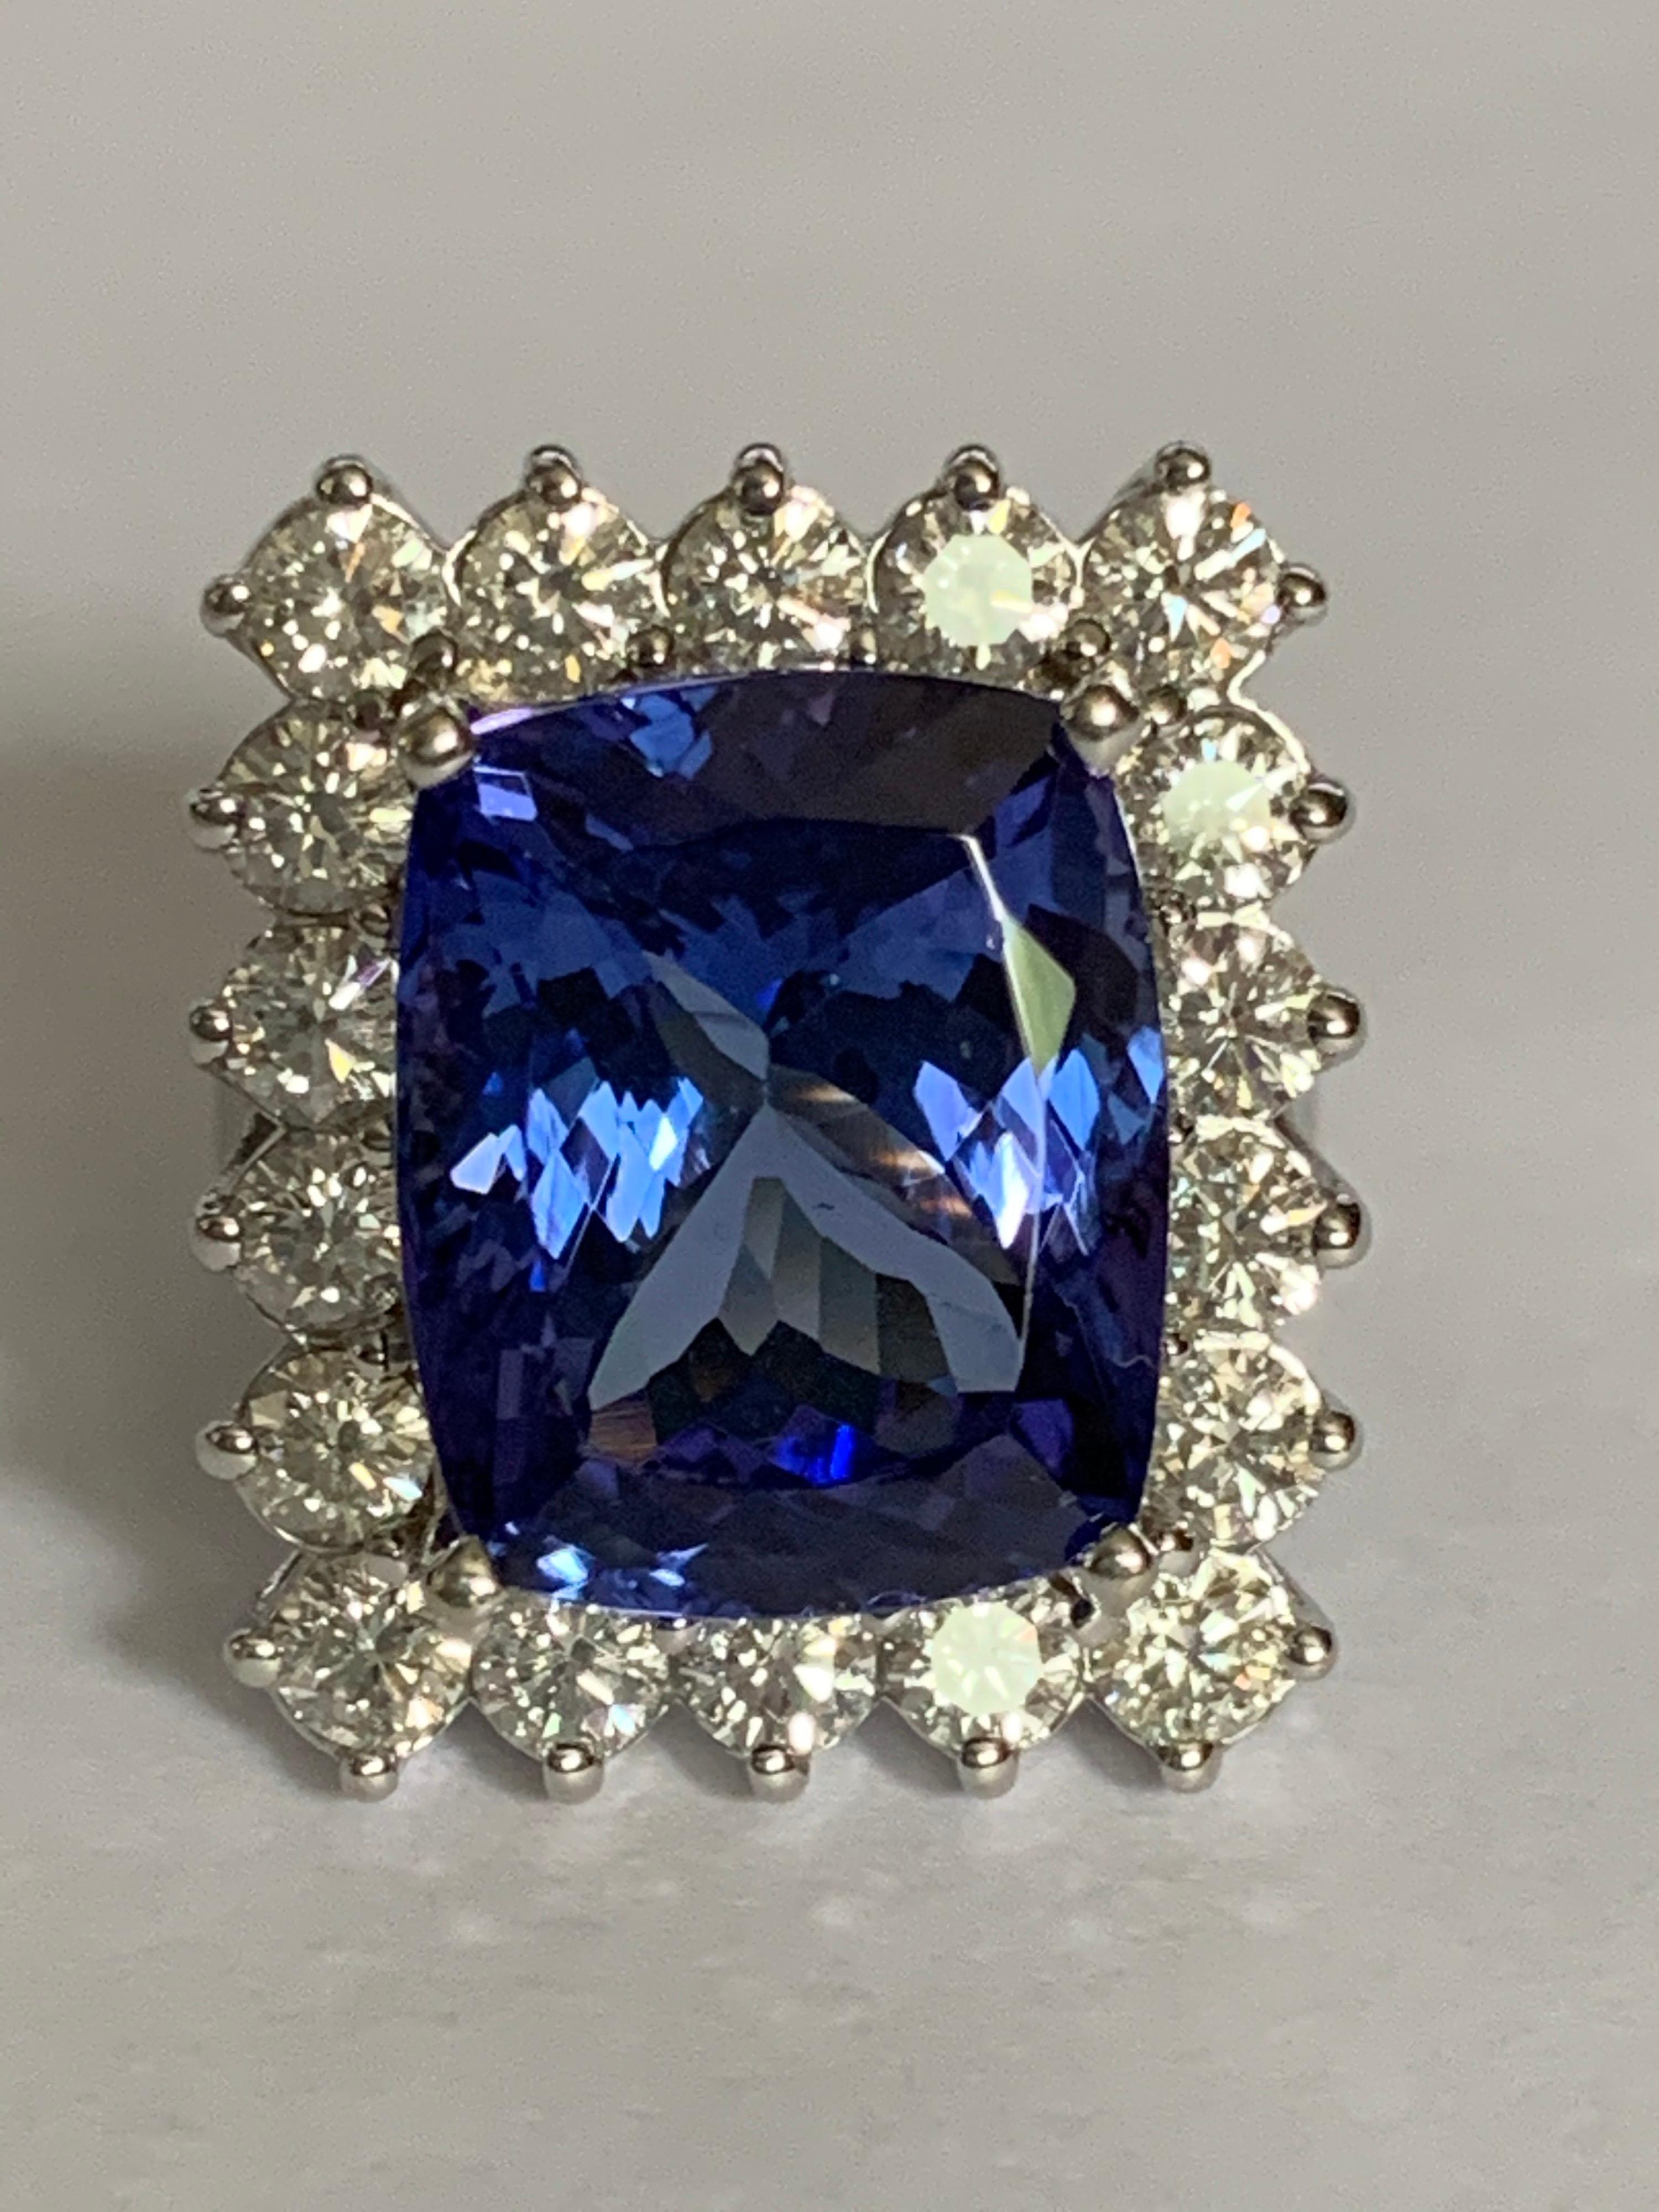 Natural 14.62mm X 11.98mm 10.35 carat Tanzanite with 18 diamonds 2.15 Carat set in 18 karat white gold is handcrafted Ring. 
The quality of Tanzanite is AAA and all the diamonds are SI or better .F/.G color .
The ring is exceptional and you will